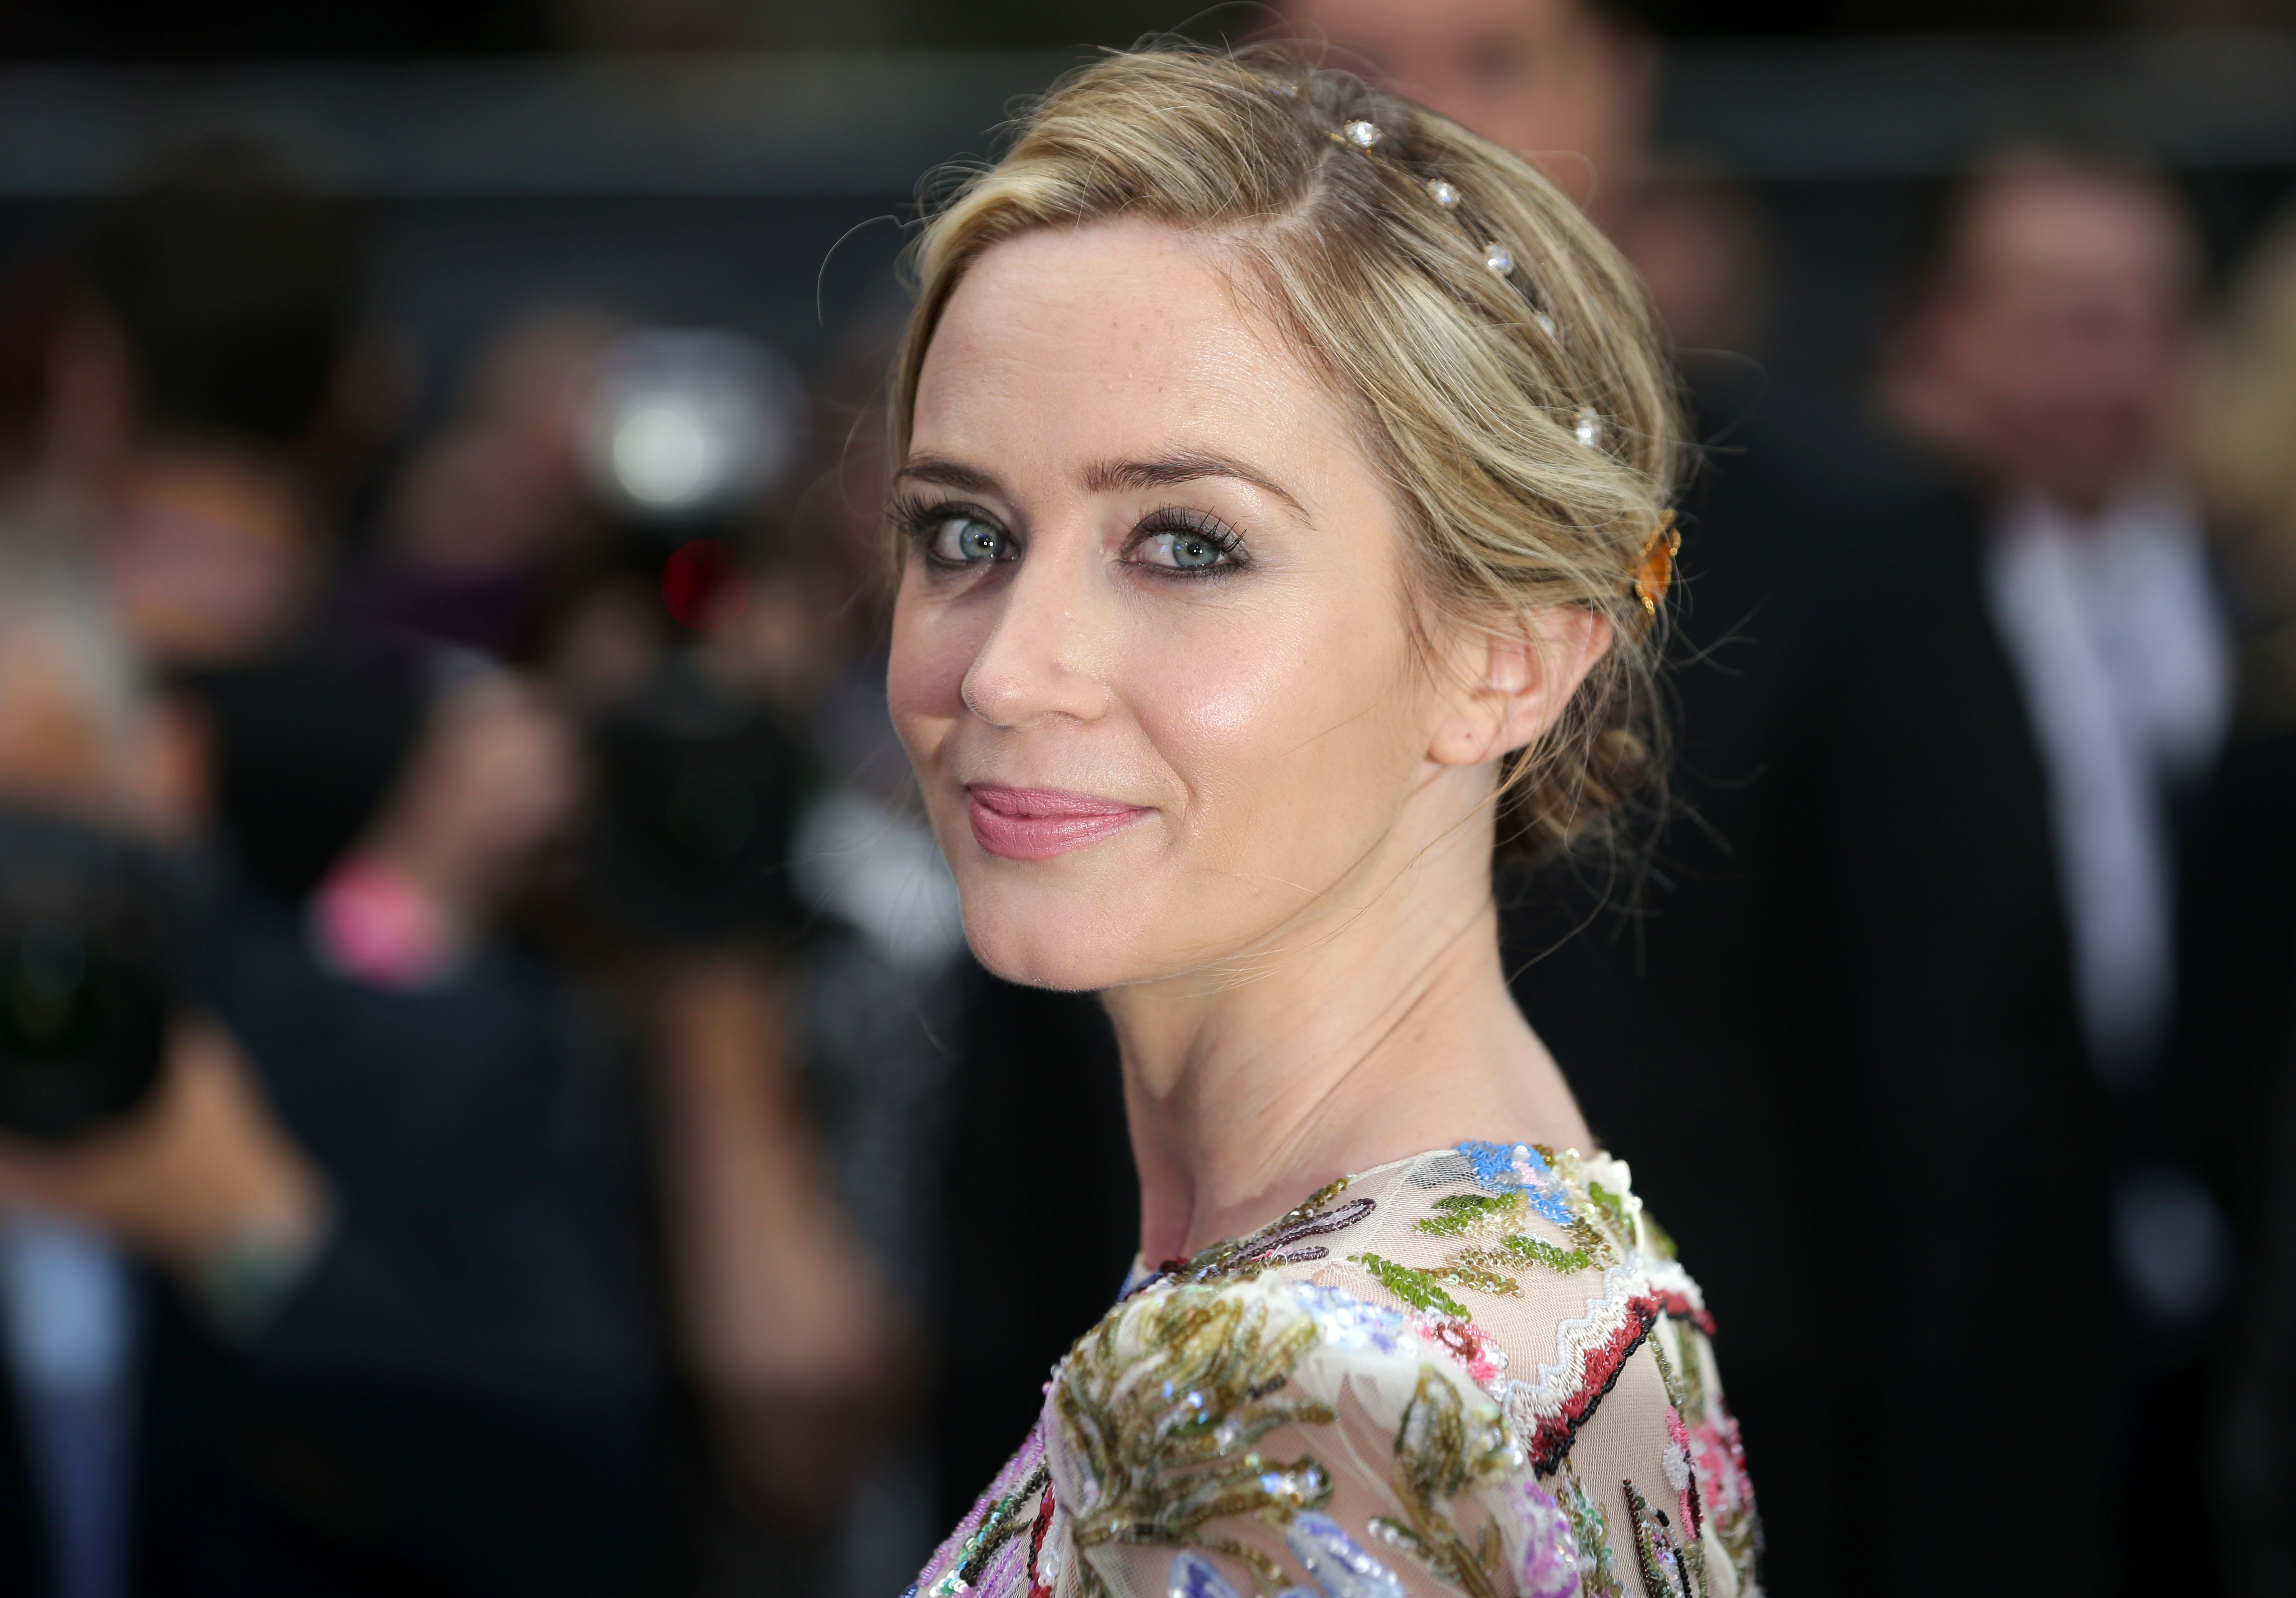 British actress Emily Blunt poses for photographers as she arrives to attend the World Premiere of the film 'The Girl on the Train', in central London on September 20, 2016. / AFP / DANIEL LEAL-OLIVAS        (Photo credit should read DANIEL LEAL-OLIVAS/AFP/Getty Images) (DANIEL LEAL-OLIVAS-AFP/Getty Images)